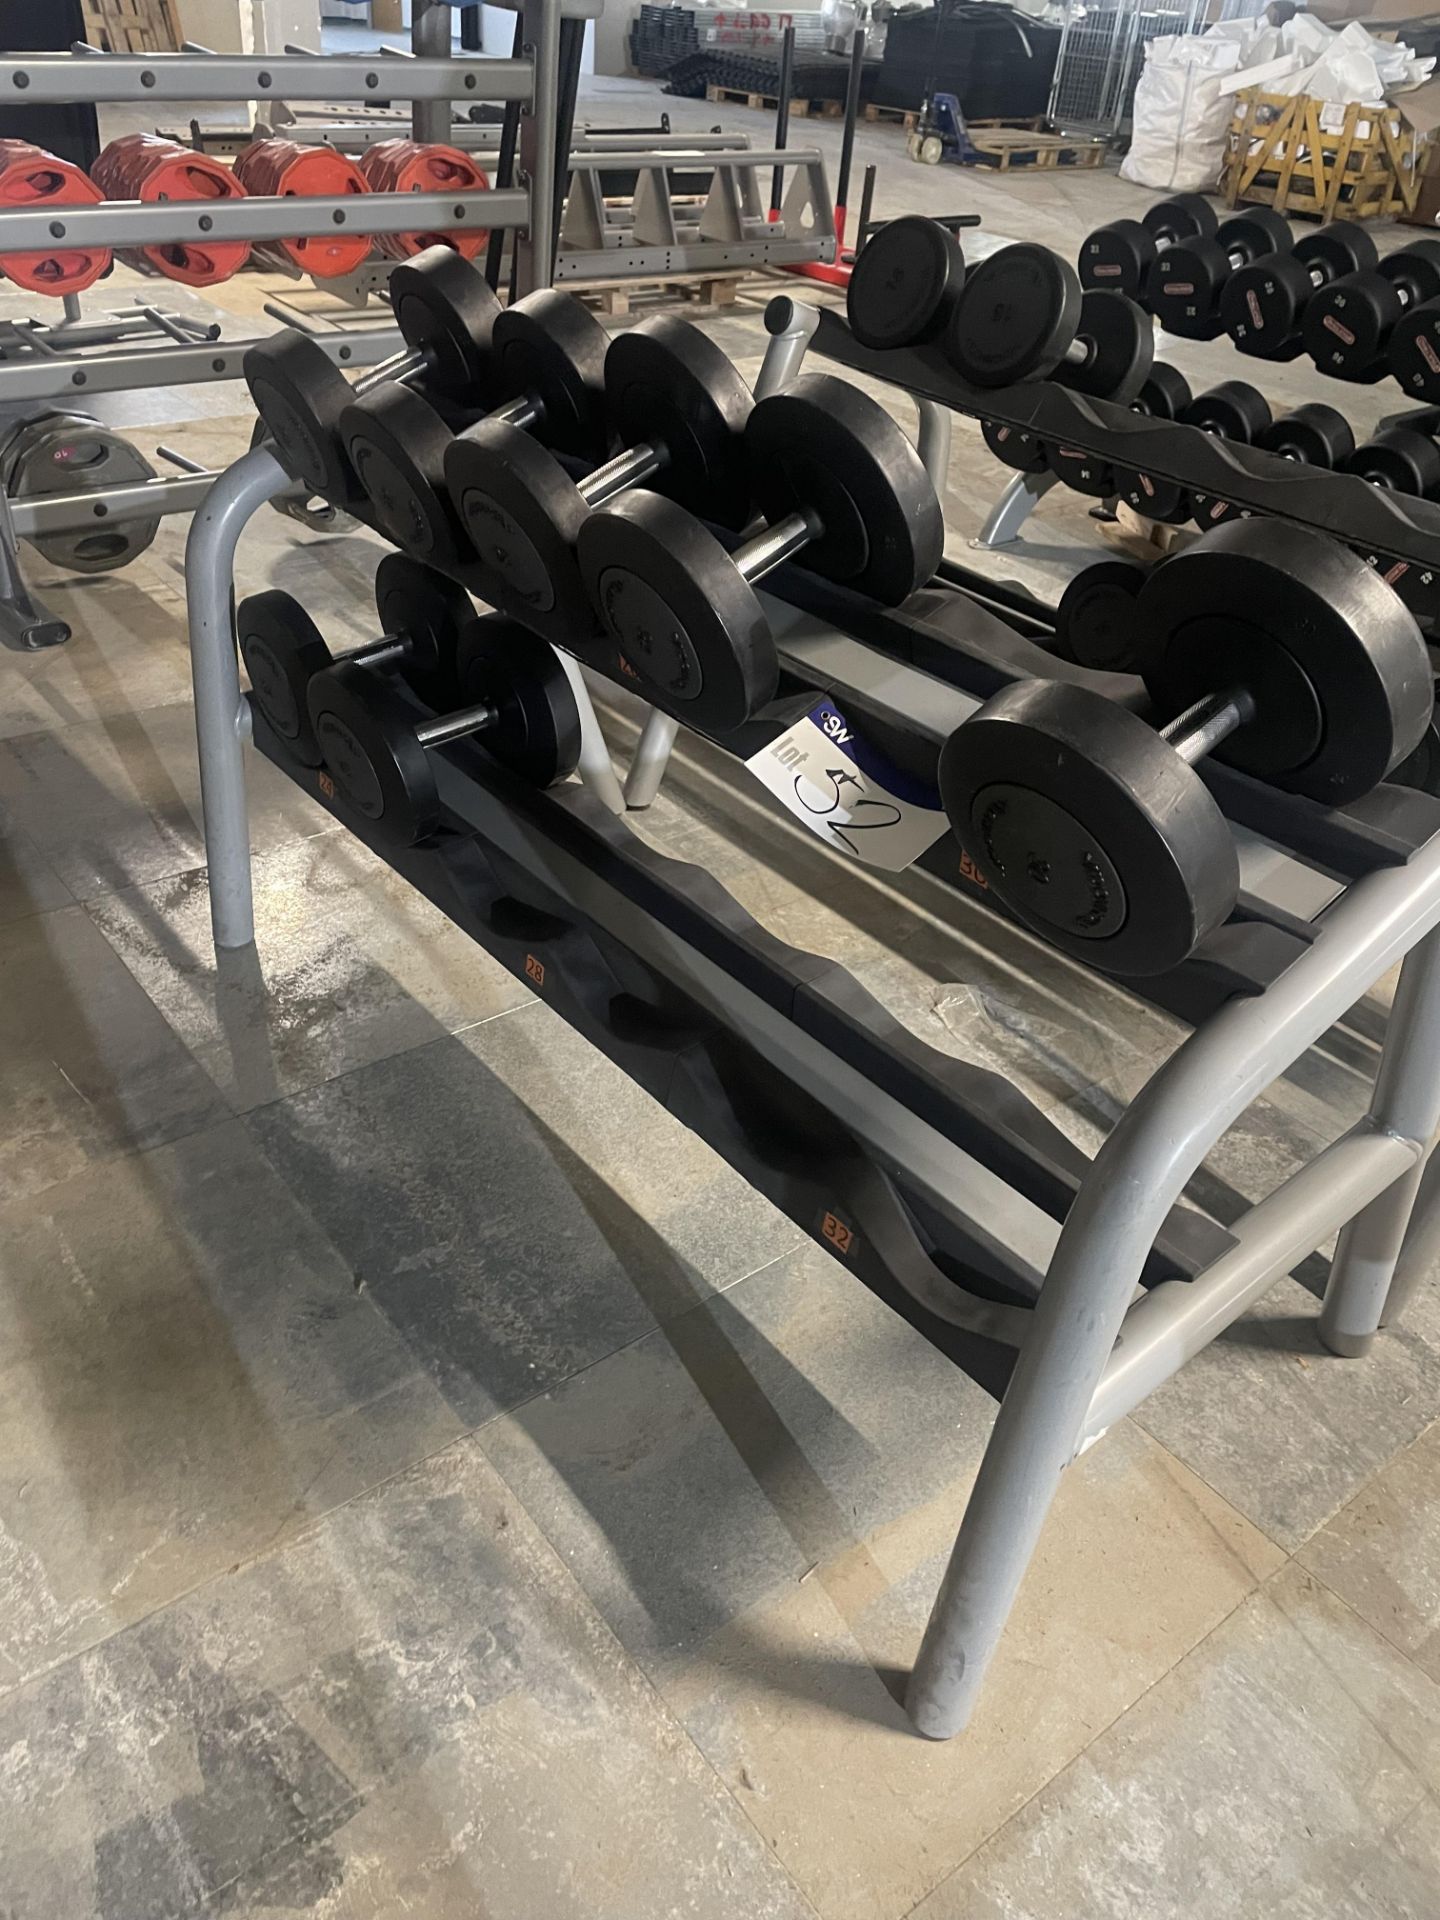 12 Section Dumbbell Stand - Image 2 of 3